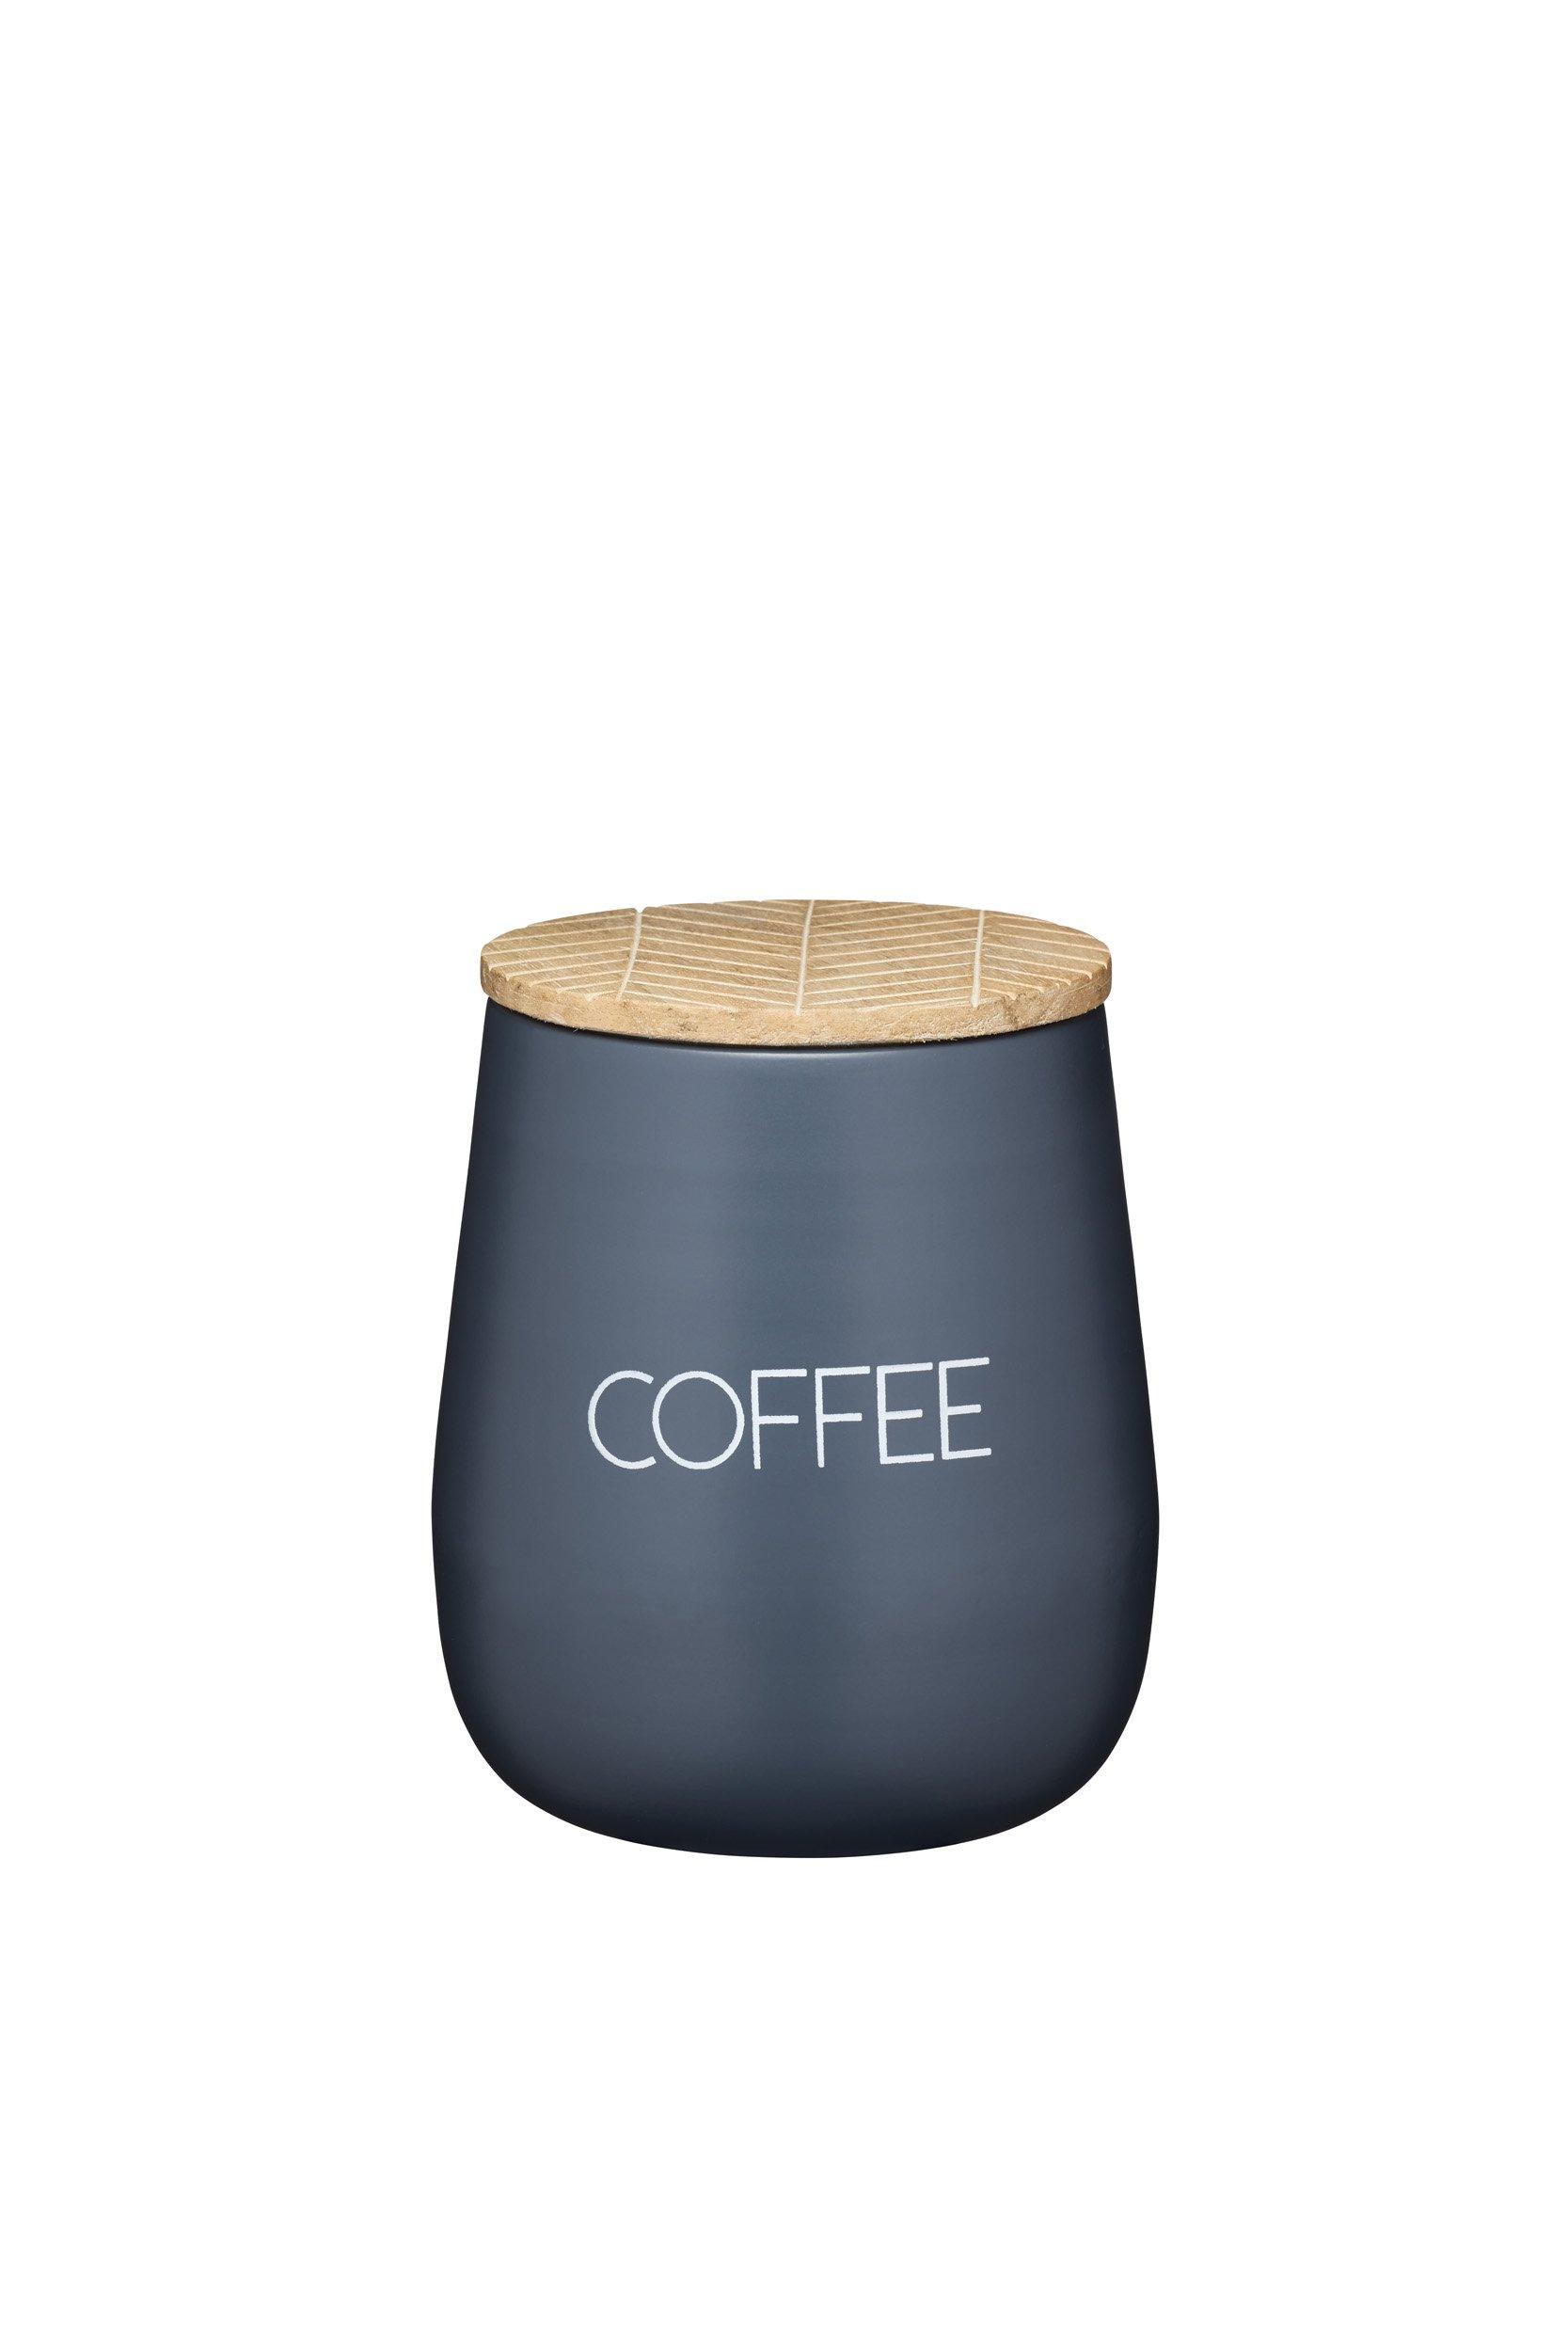 Kitchencraft Serenity Coffee Canister|